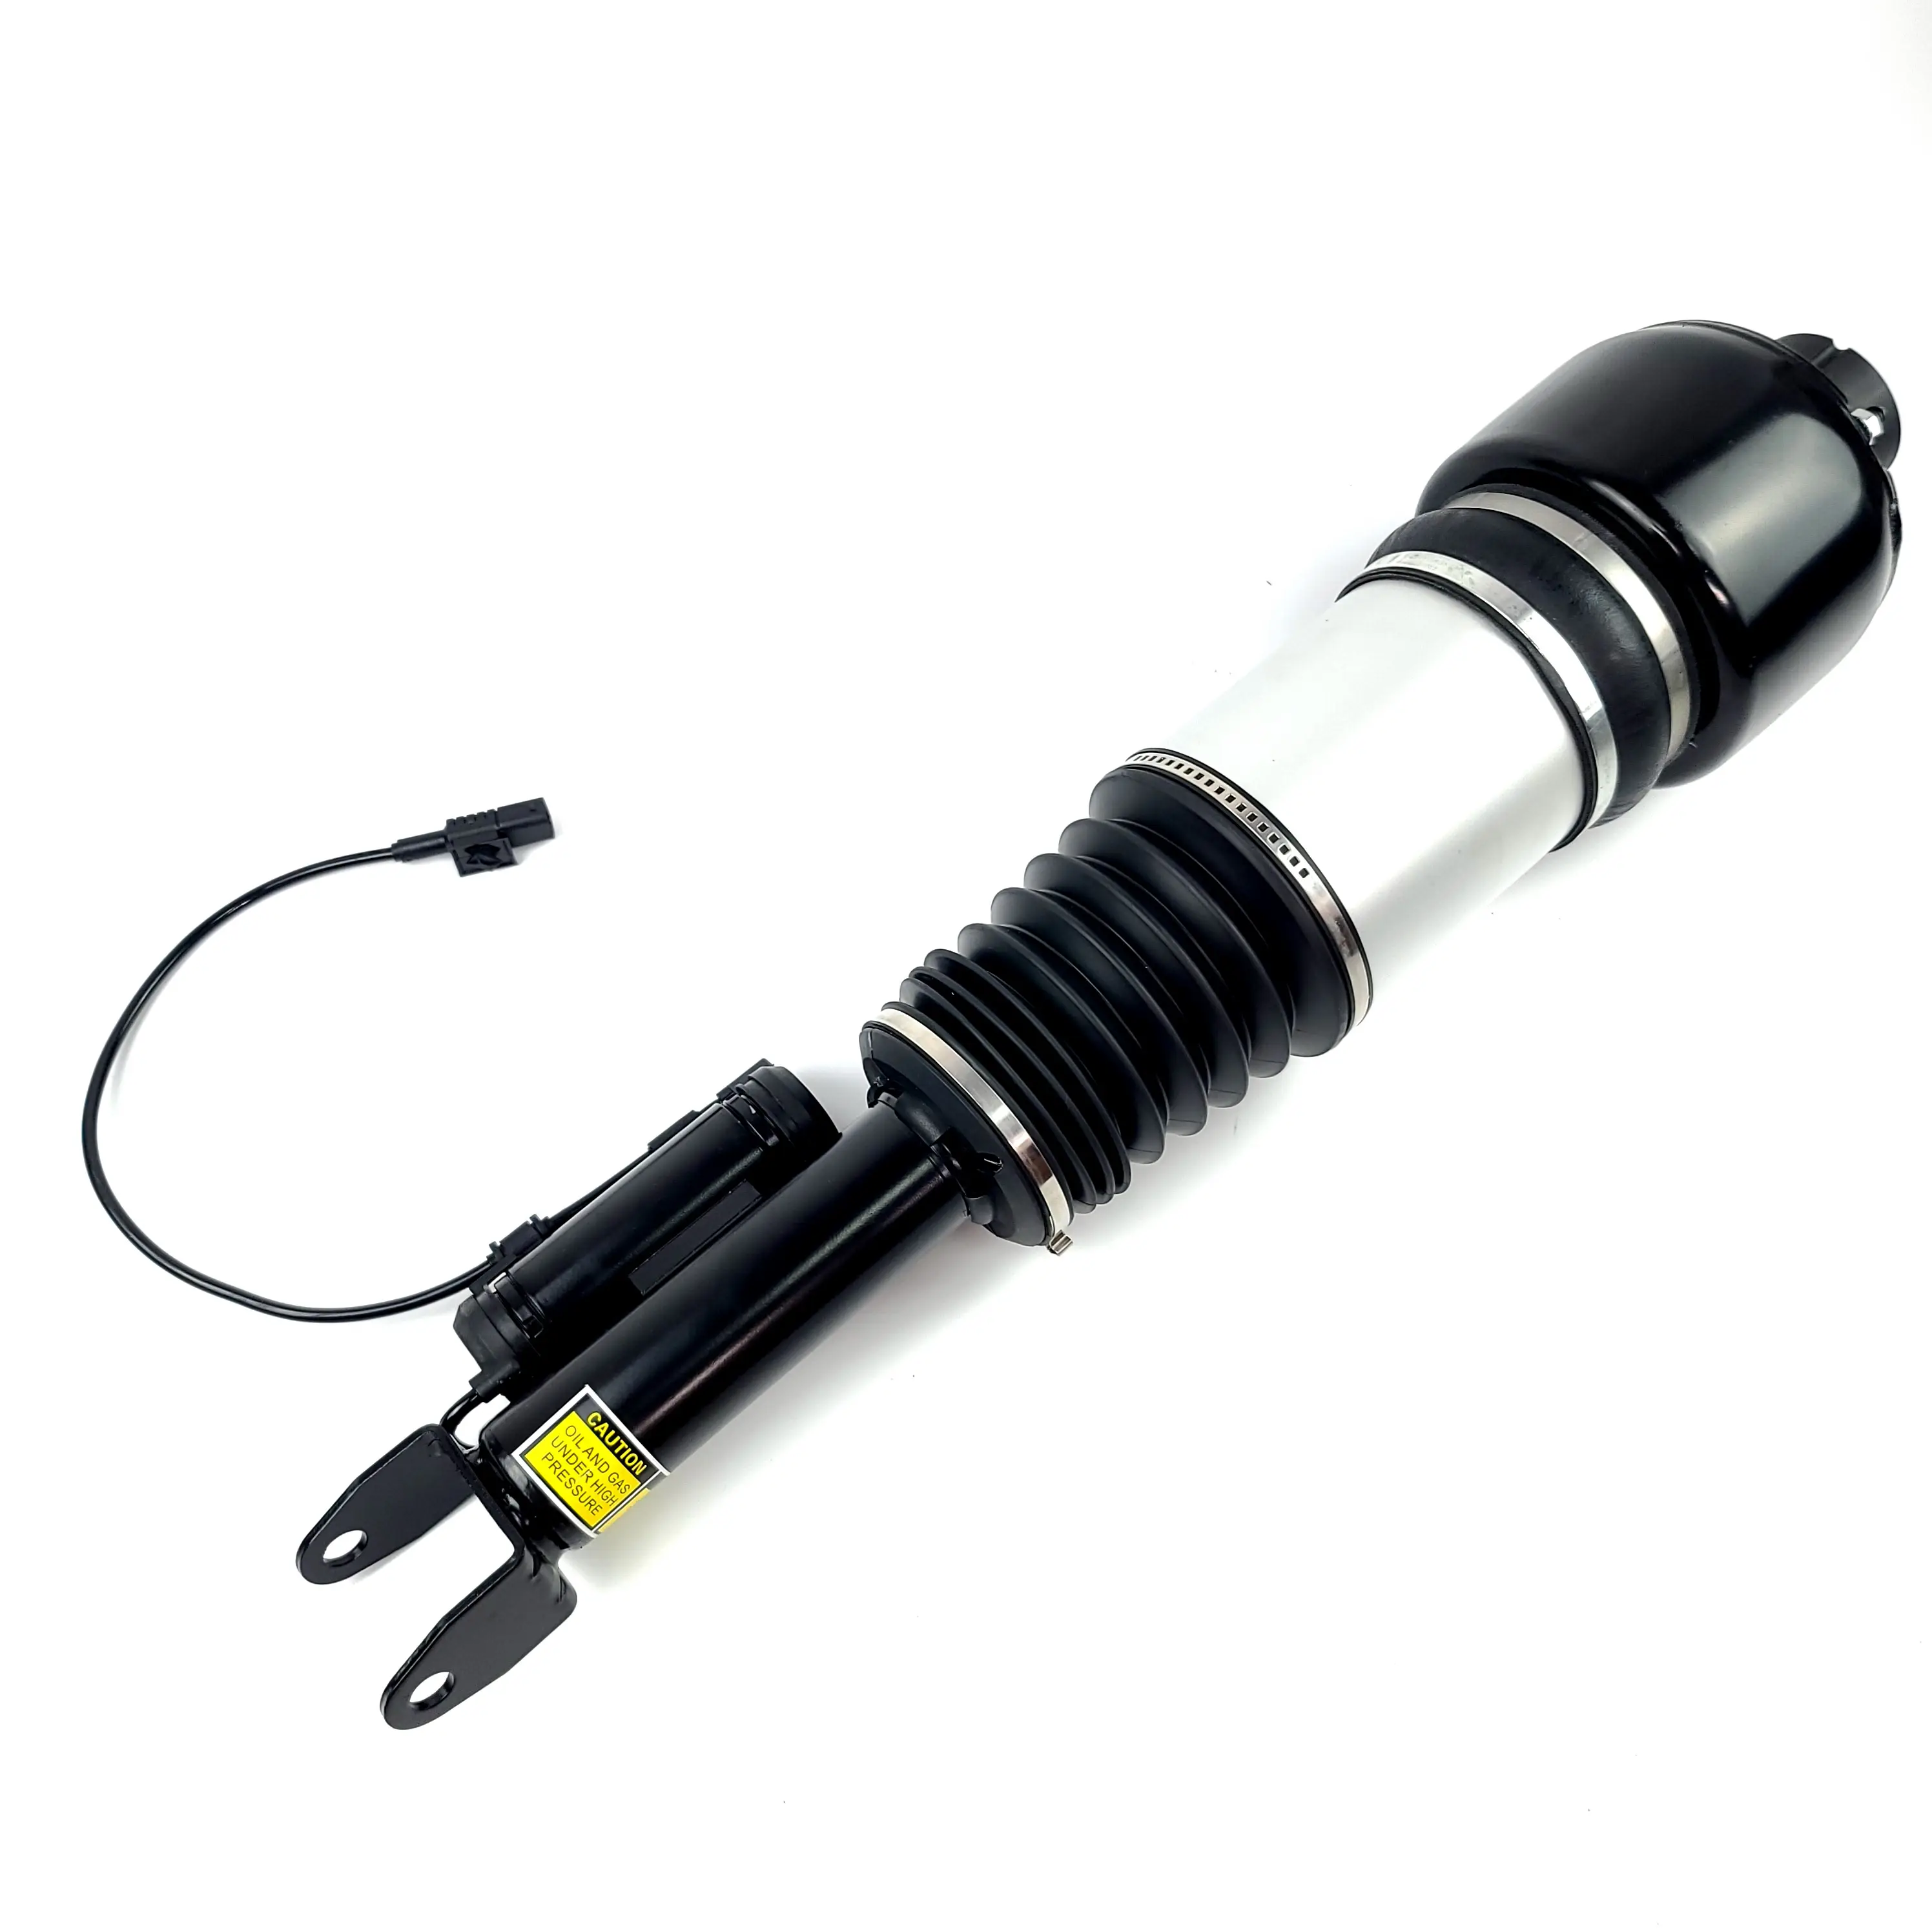 Suspension Factory Air Shock Absorber 2113206113 2113209313 2113206013 2113209413 For Mercedes W211 E-CLASS 2003-2009 FRONT